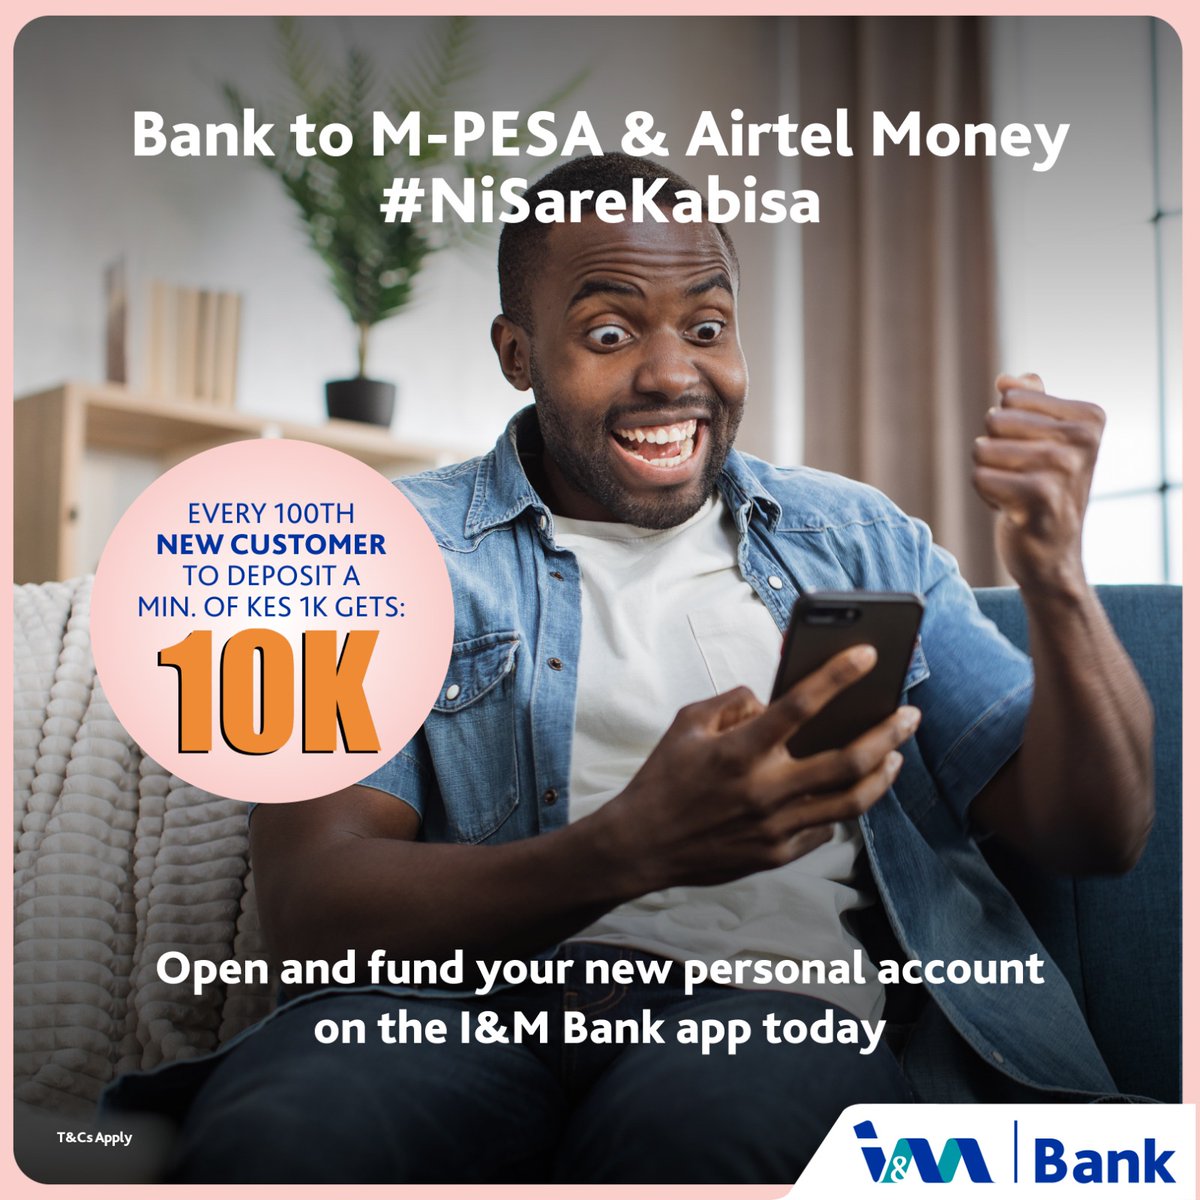 Opening an IM Personal account is always easier and faster. Today, Open the account on the IM Bank app and enjoy the Free transfer of money from the bank to mobile wallets. Free Bank to Mpesa. #NiSareKabisa